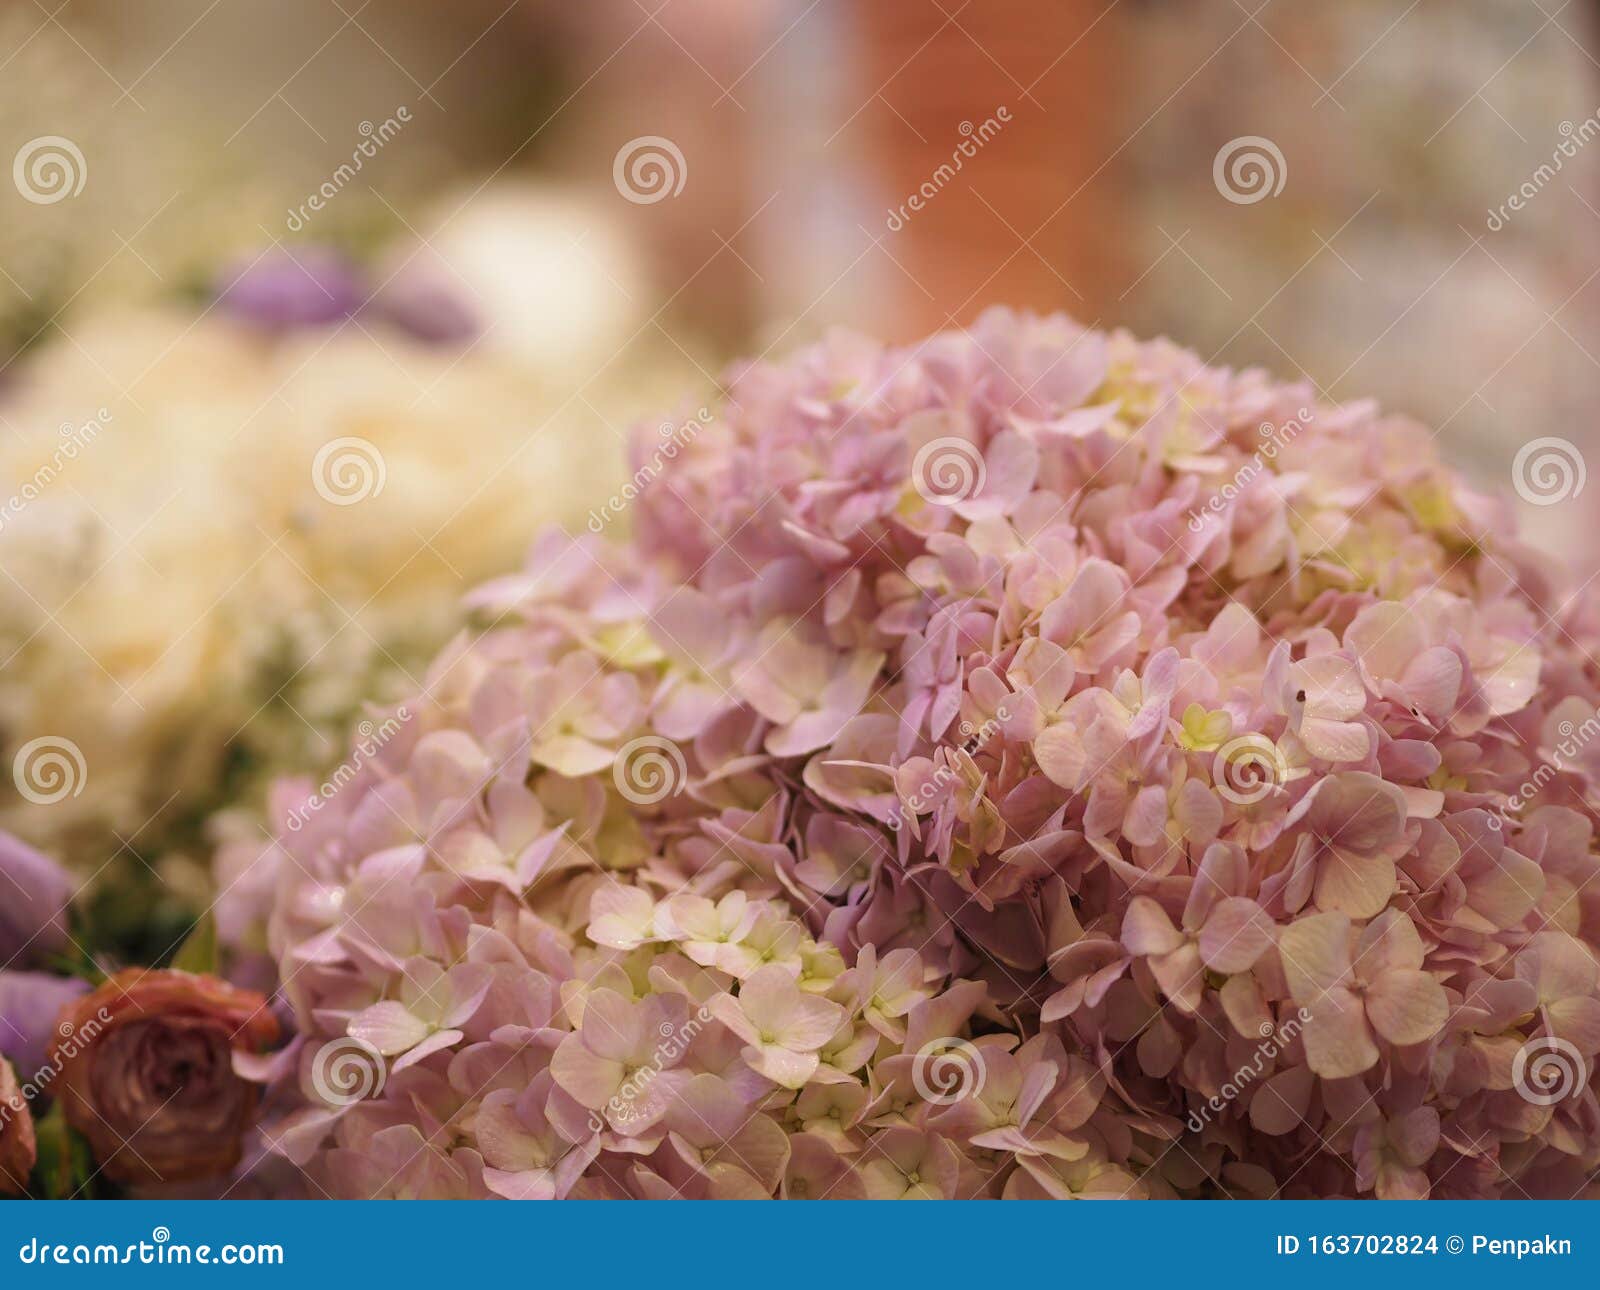 Hydrangea Or Ajisai Pink Flower On Blurred Of Nature Background Stock Photo Image Of Blooming Fragility